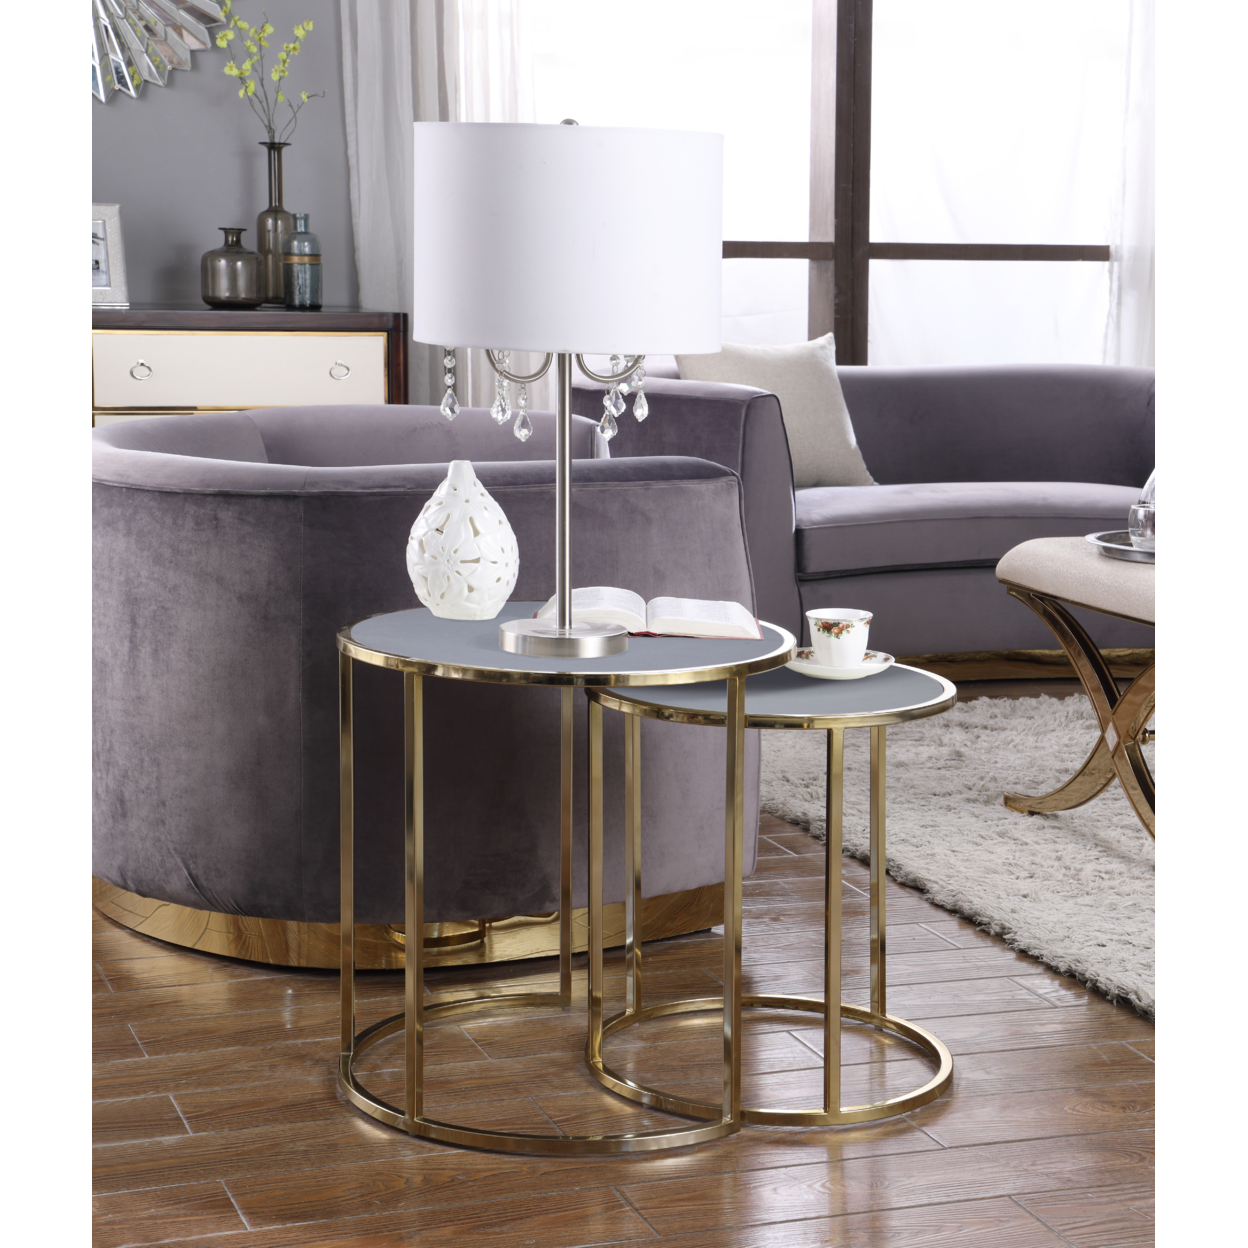 Blayne Nightstand Side Table 2 Piece Set Gold Finished Gibbous Moon Frame PU Leather Top - Brown